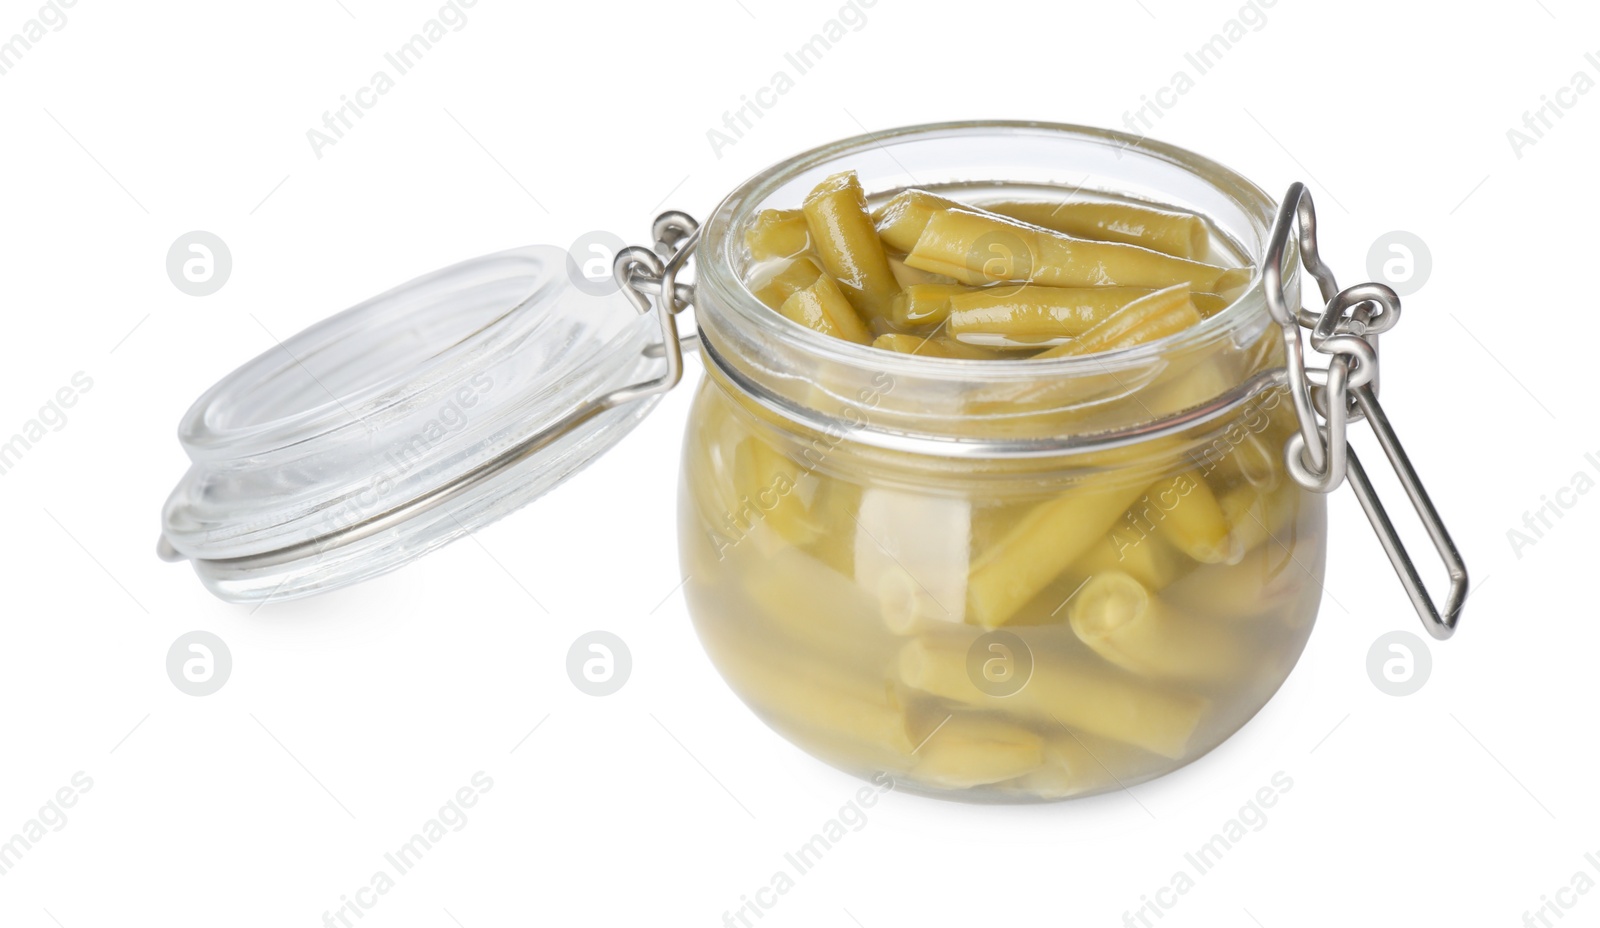 Photo of Canned green beans in jar isolated on white